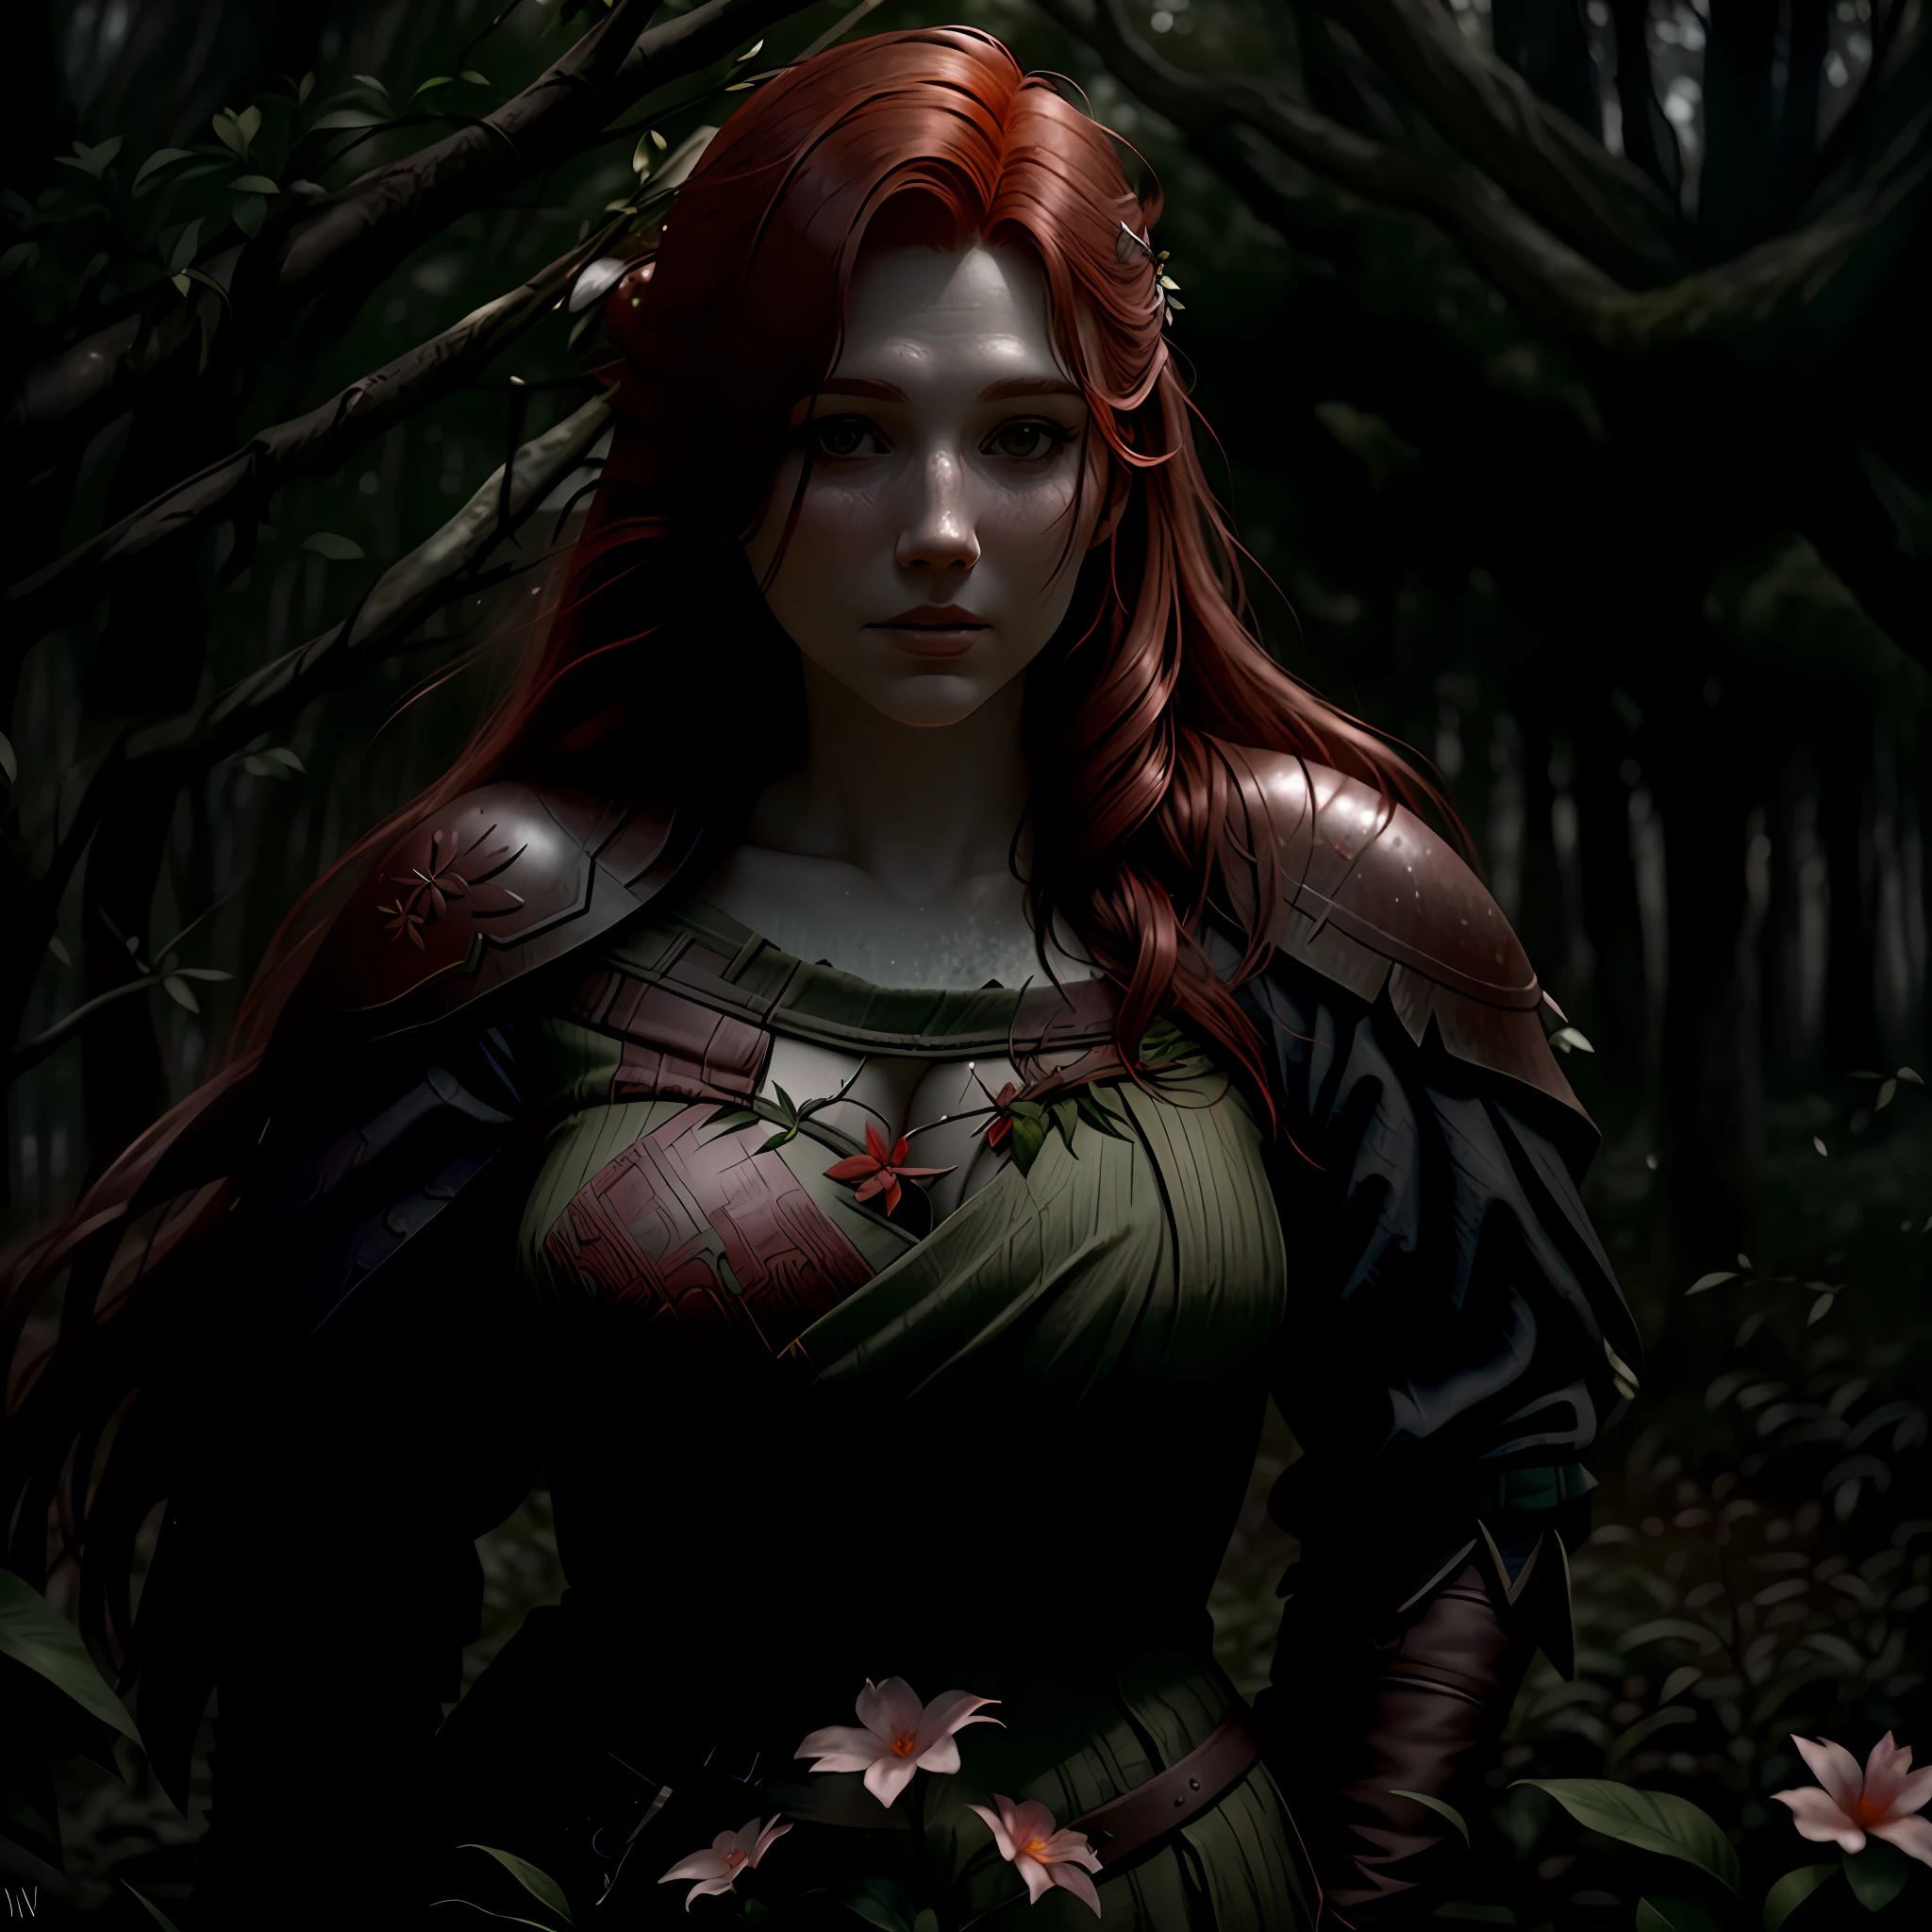 Red-haired woman, third person perspective, viking, medieval, mystical, forest environment, damp plants and flowers, branches, best quality, cinematic focus, perfect lighting, gloomy weather, clear environment